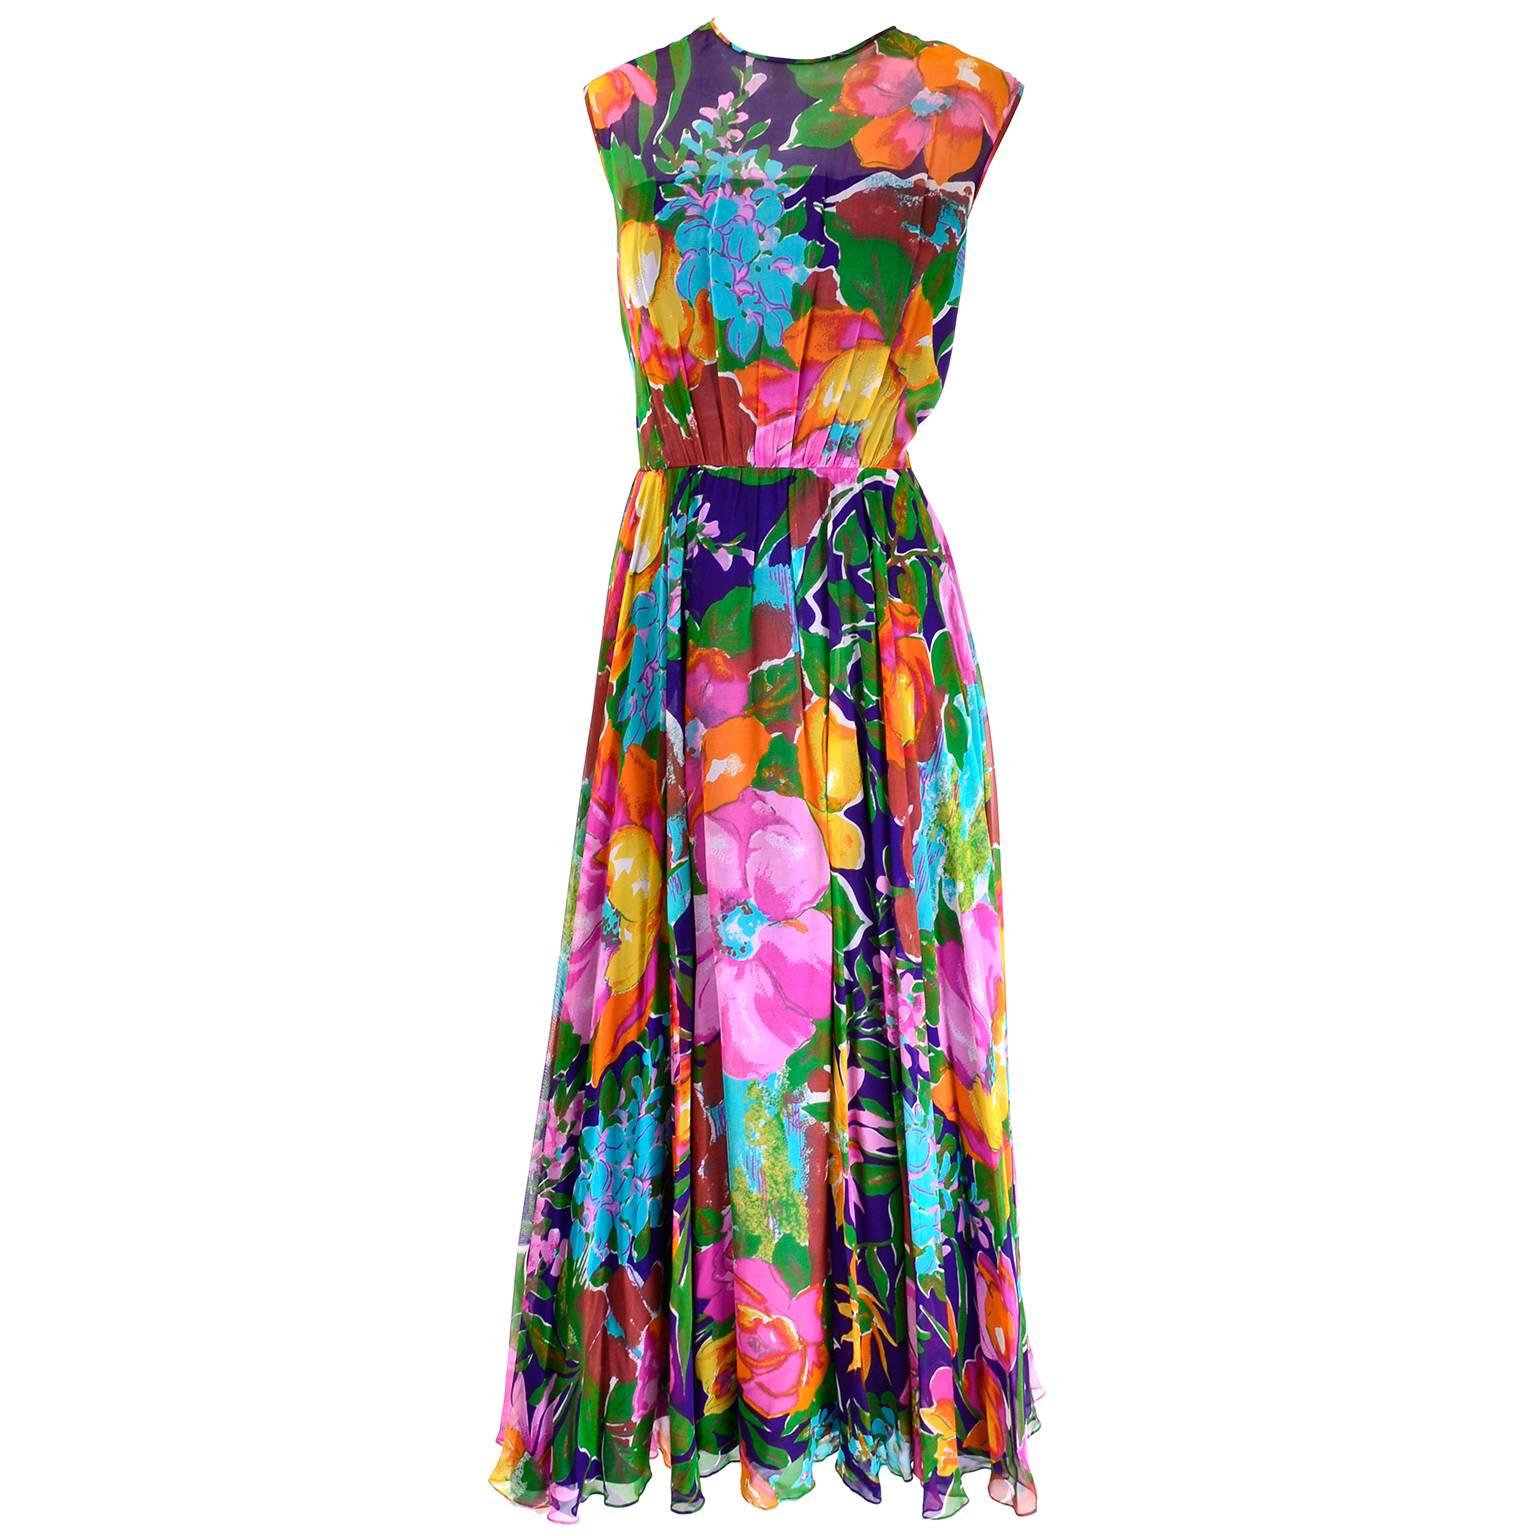 1970s Vintage Sleeveless Dress in a Bright Floral Chiffon Print